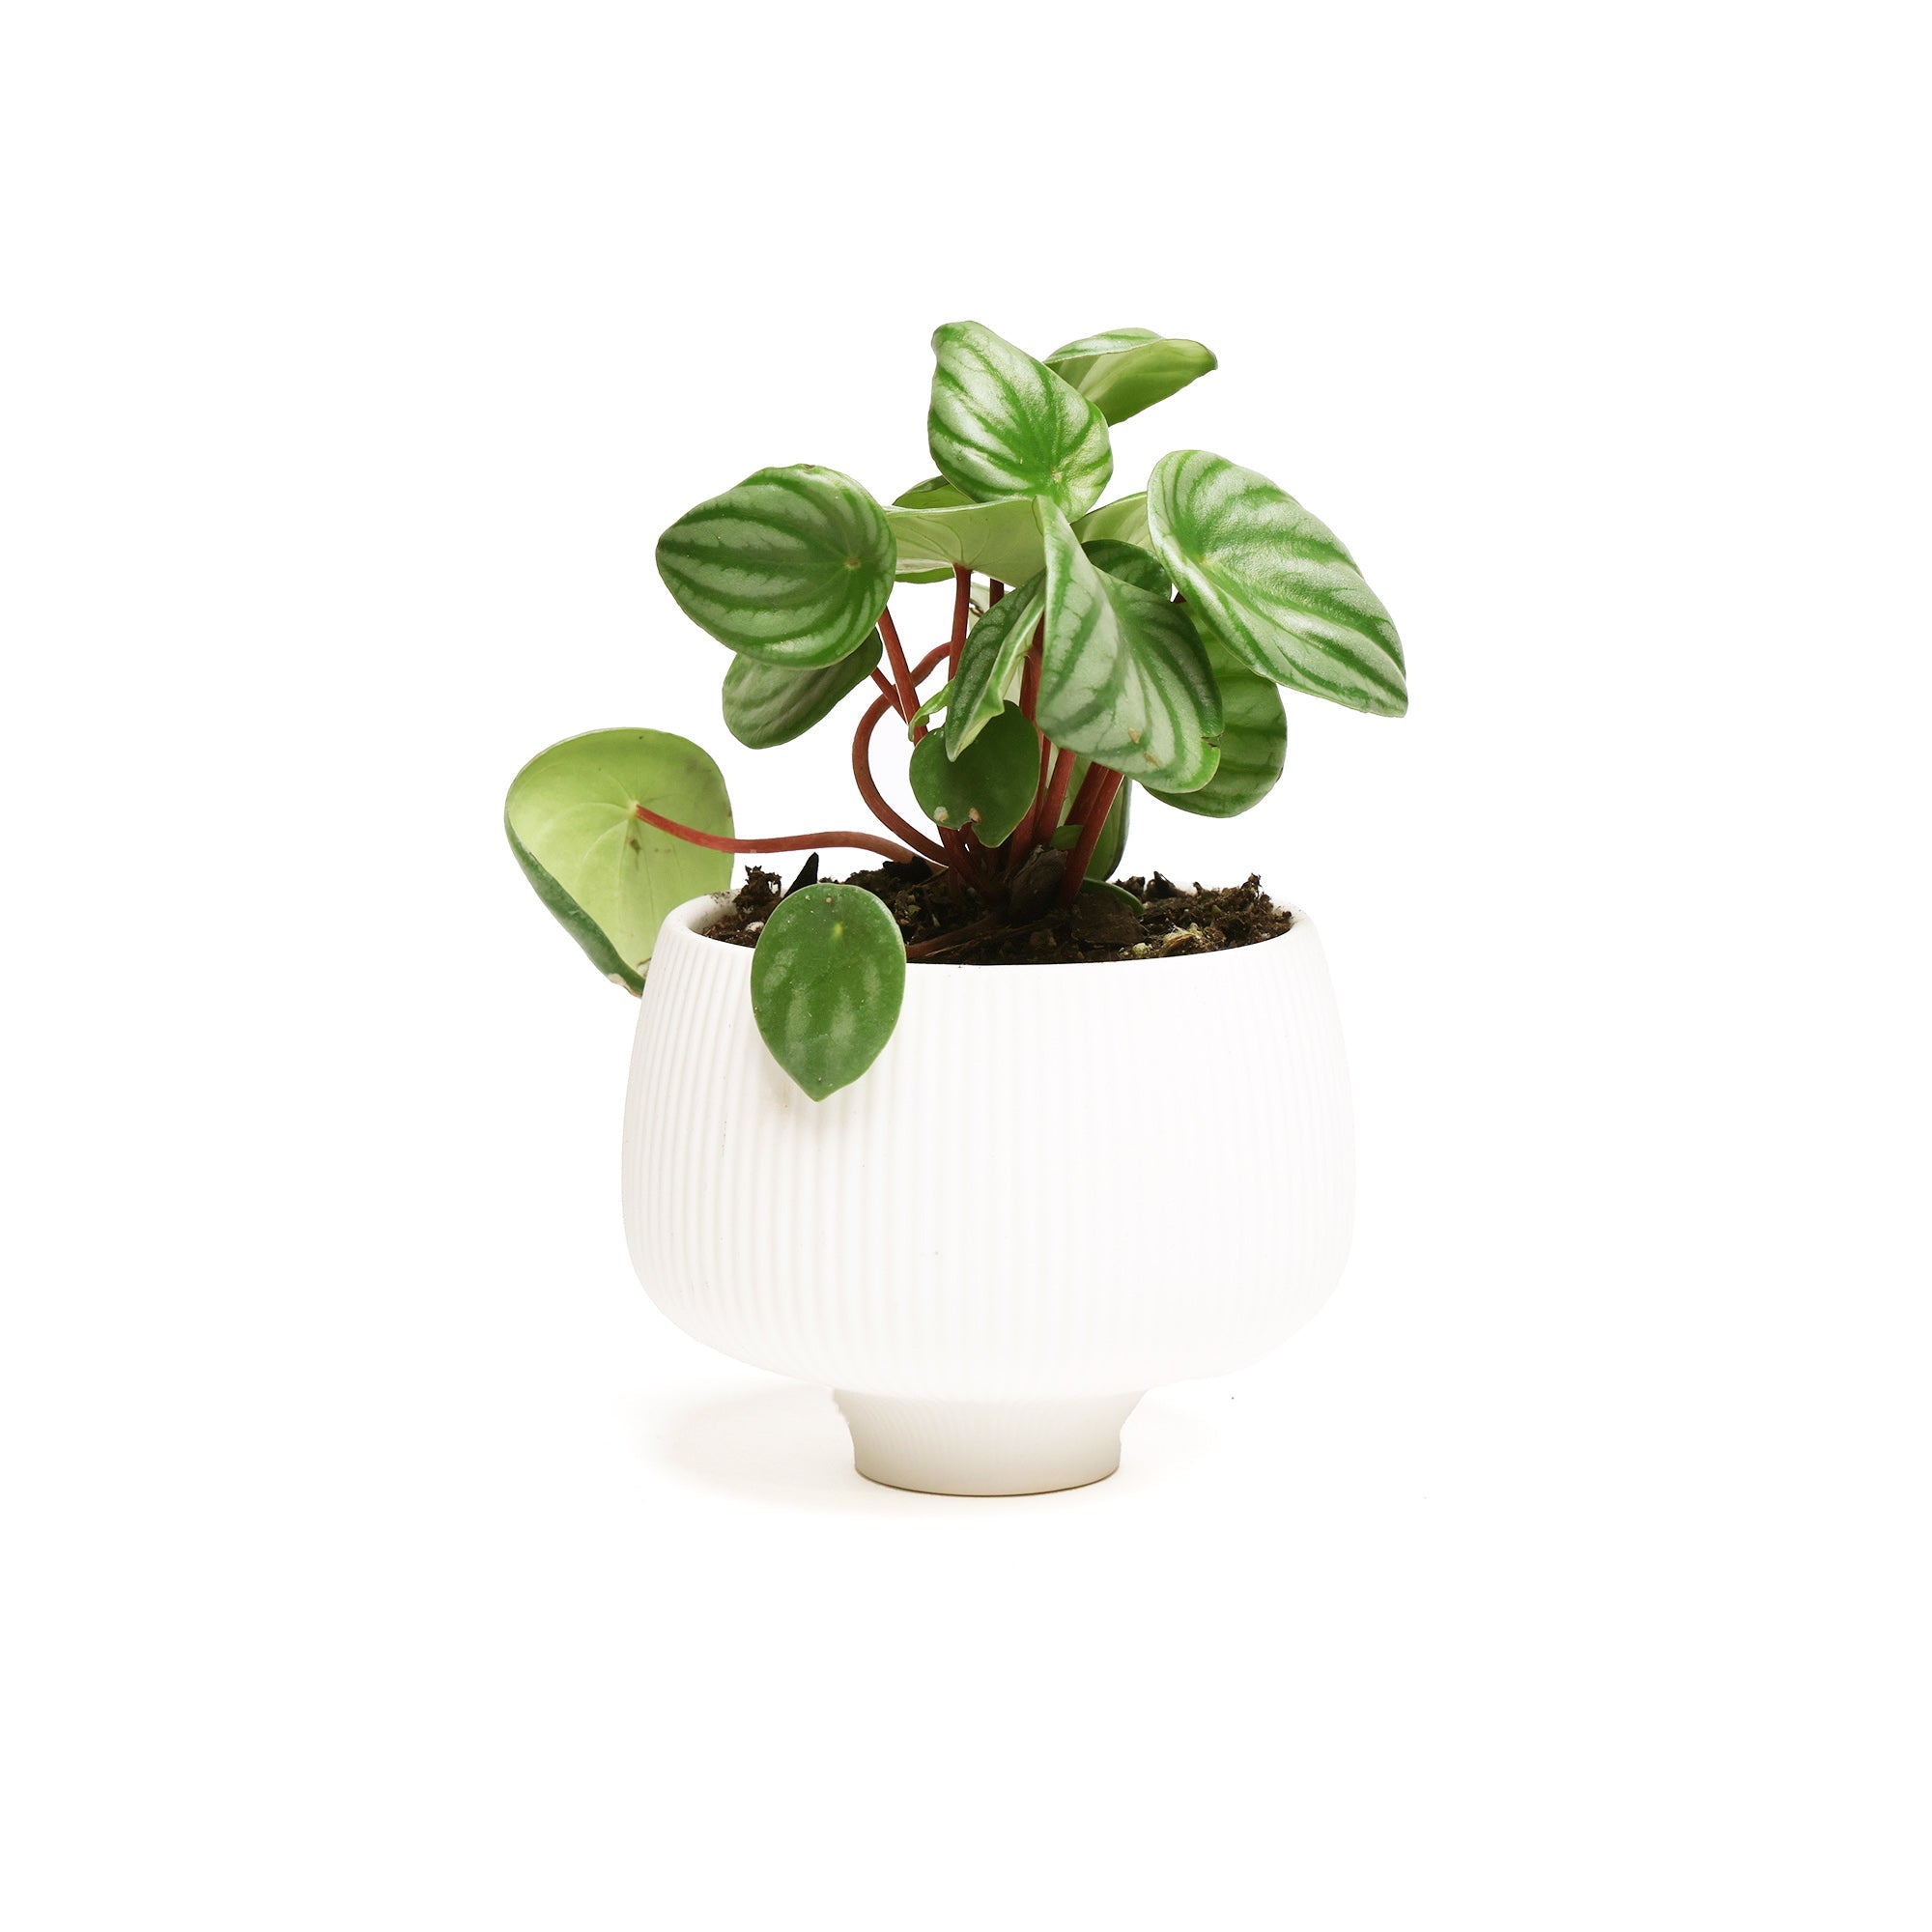 Small, glossy-leaved low maintenance Potted Peperomia Watermelon 4” plant in a white, ribbed ceramic pot by Chive Studio isolated on a white background.